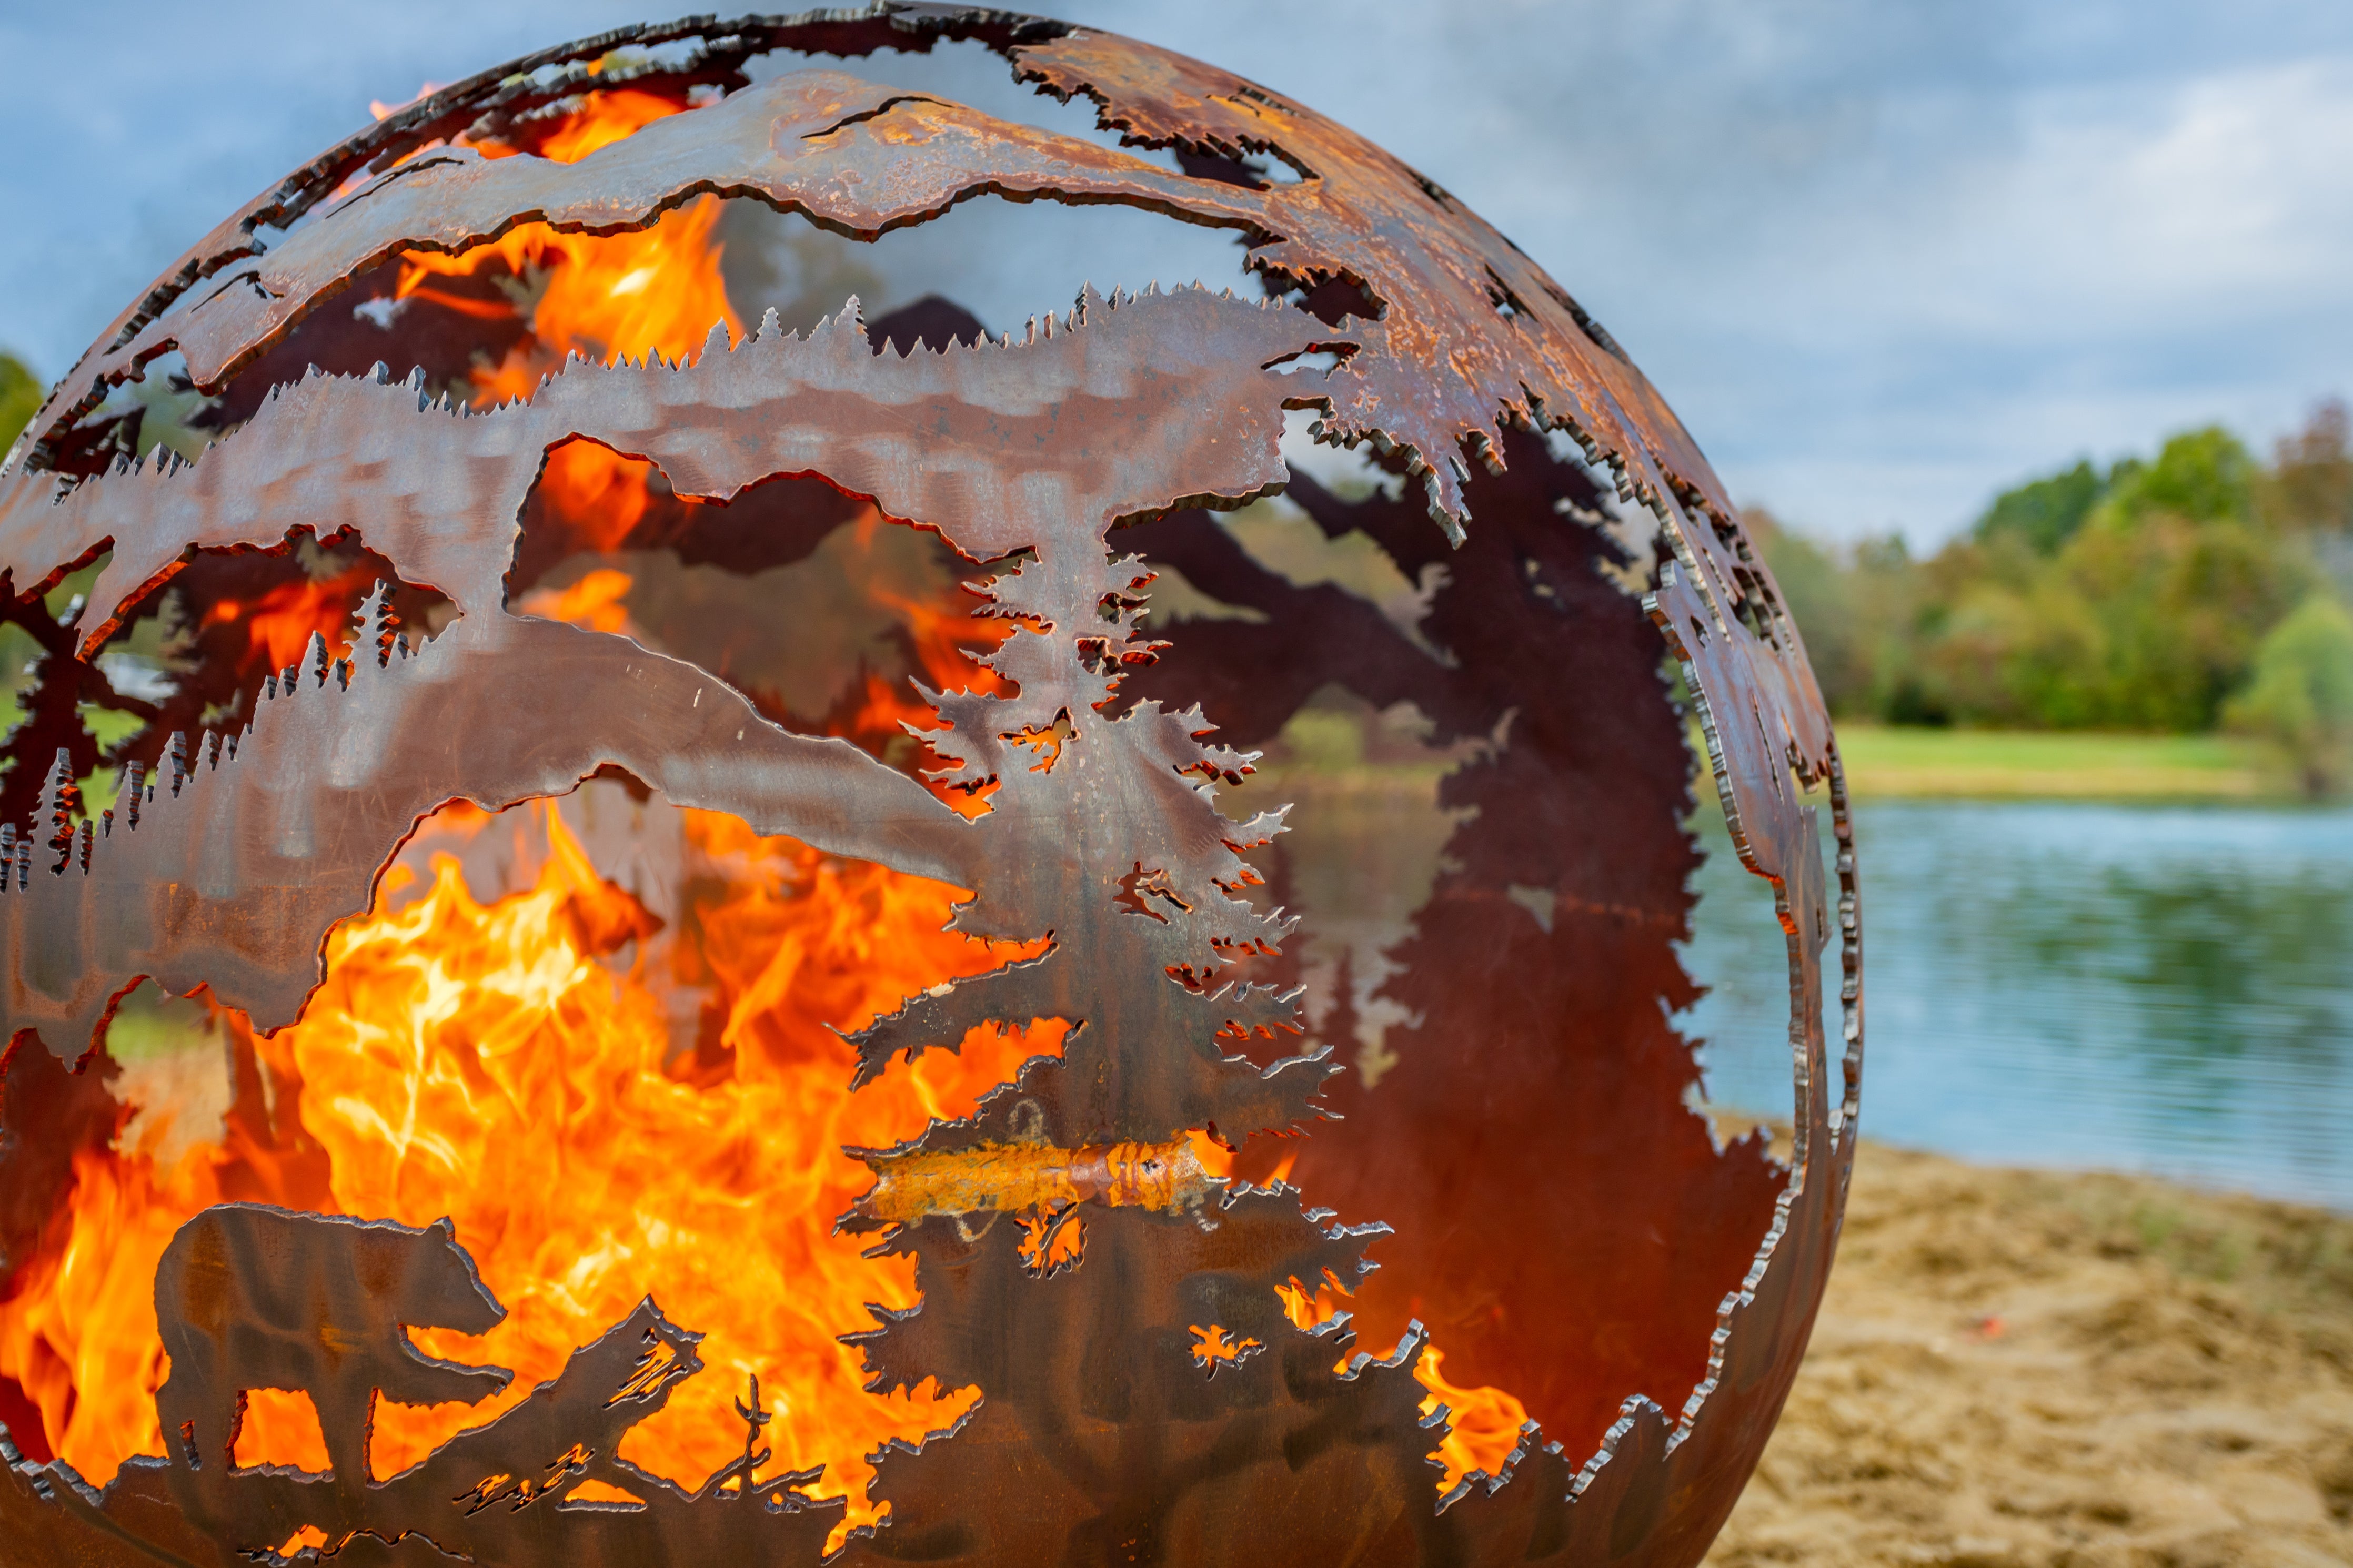 The Fire Pit Gallery Smokey Mountains Fire Pit Sphere